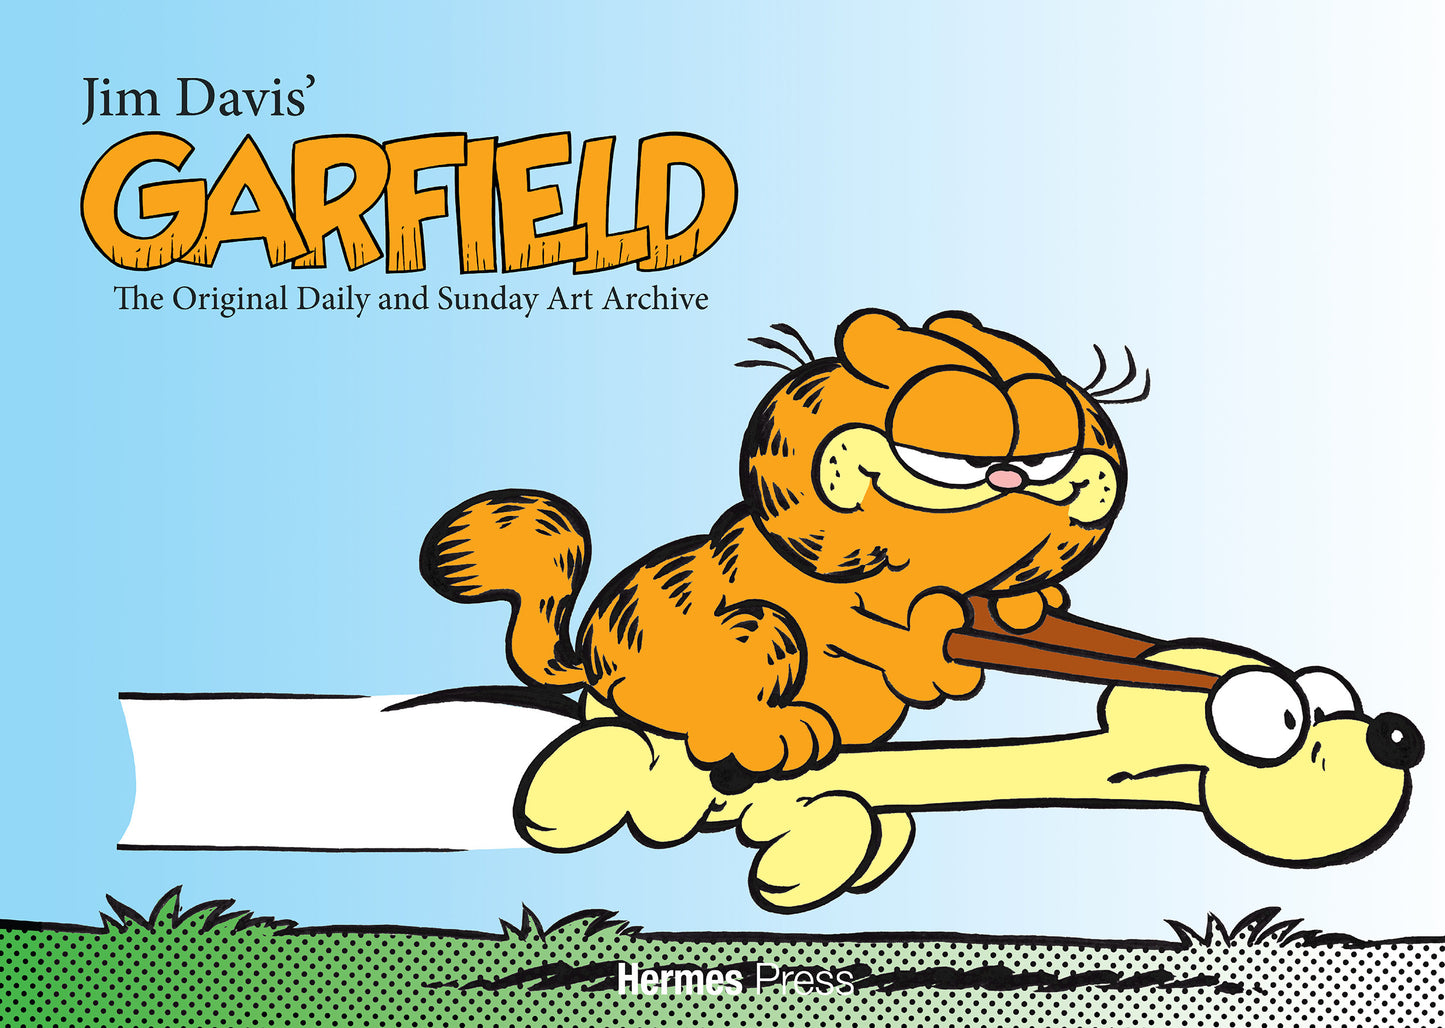 Jim Davis’ Garfield: The Original Art Daily and Sunday Archive Limited Edition